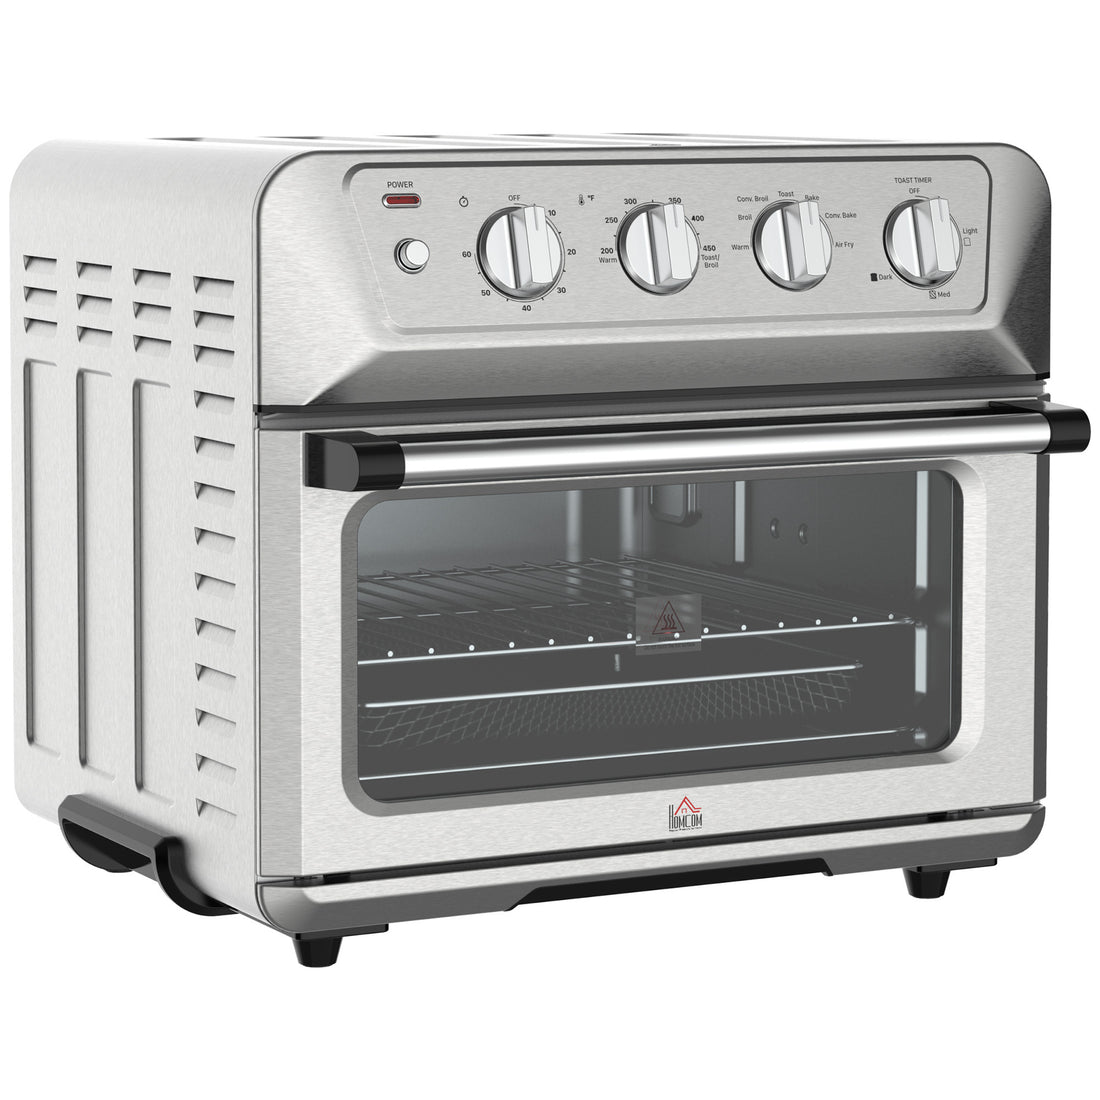 Air Fryer Toaster Oven, 21QT 7 In 1 Convection Oven silver-stainless steel